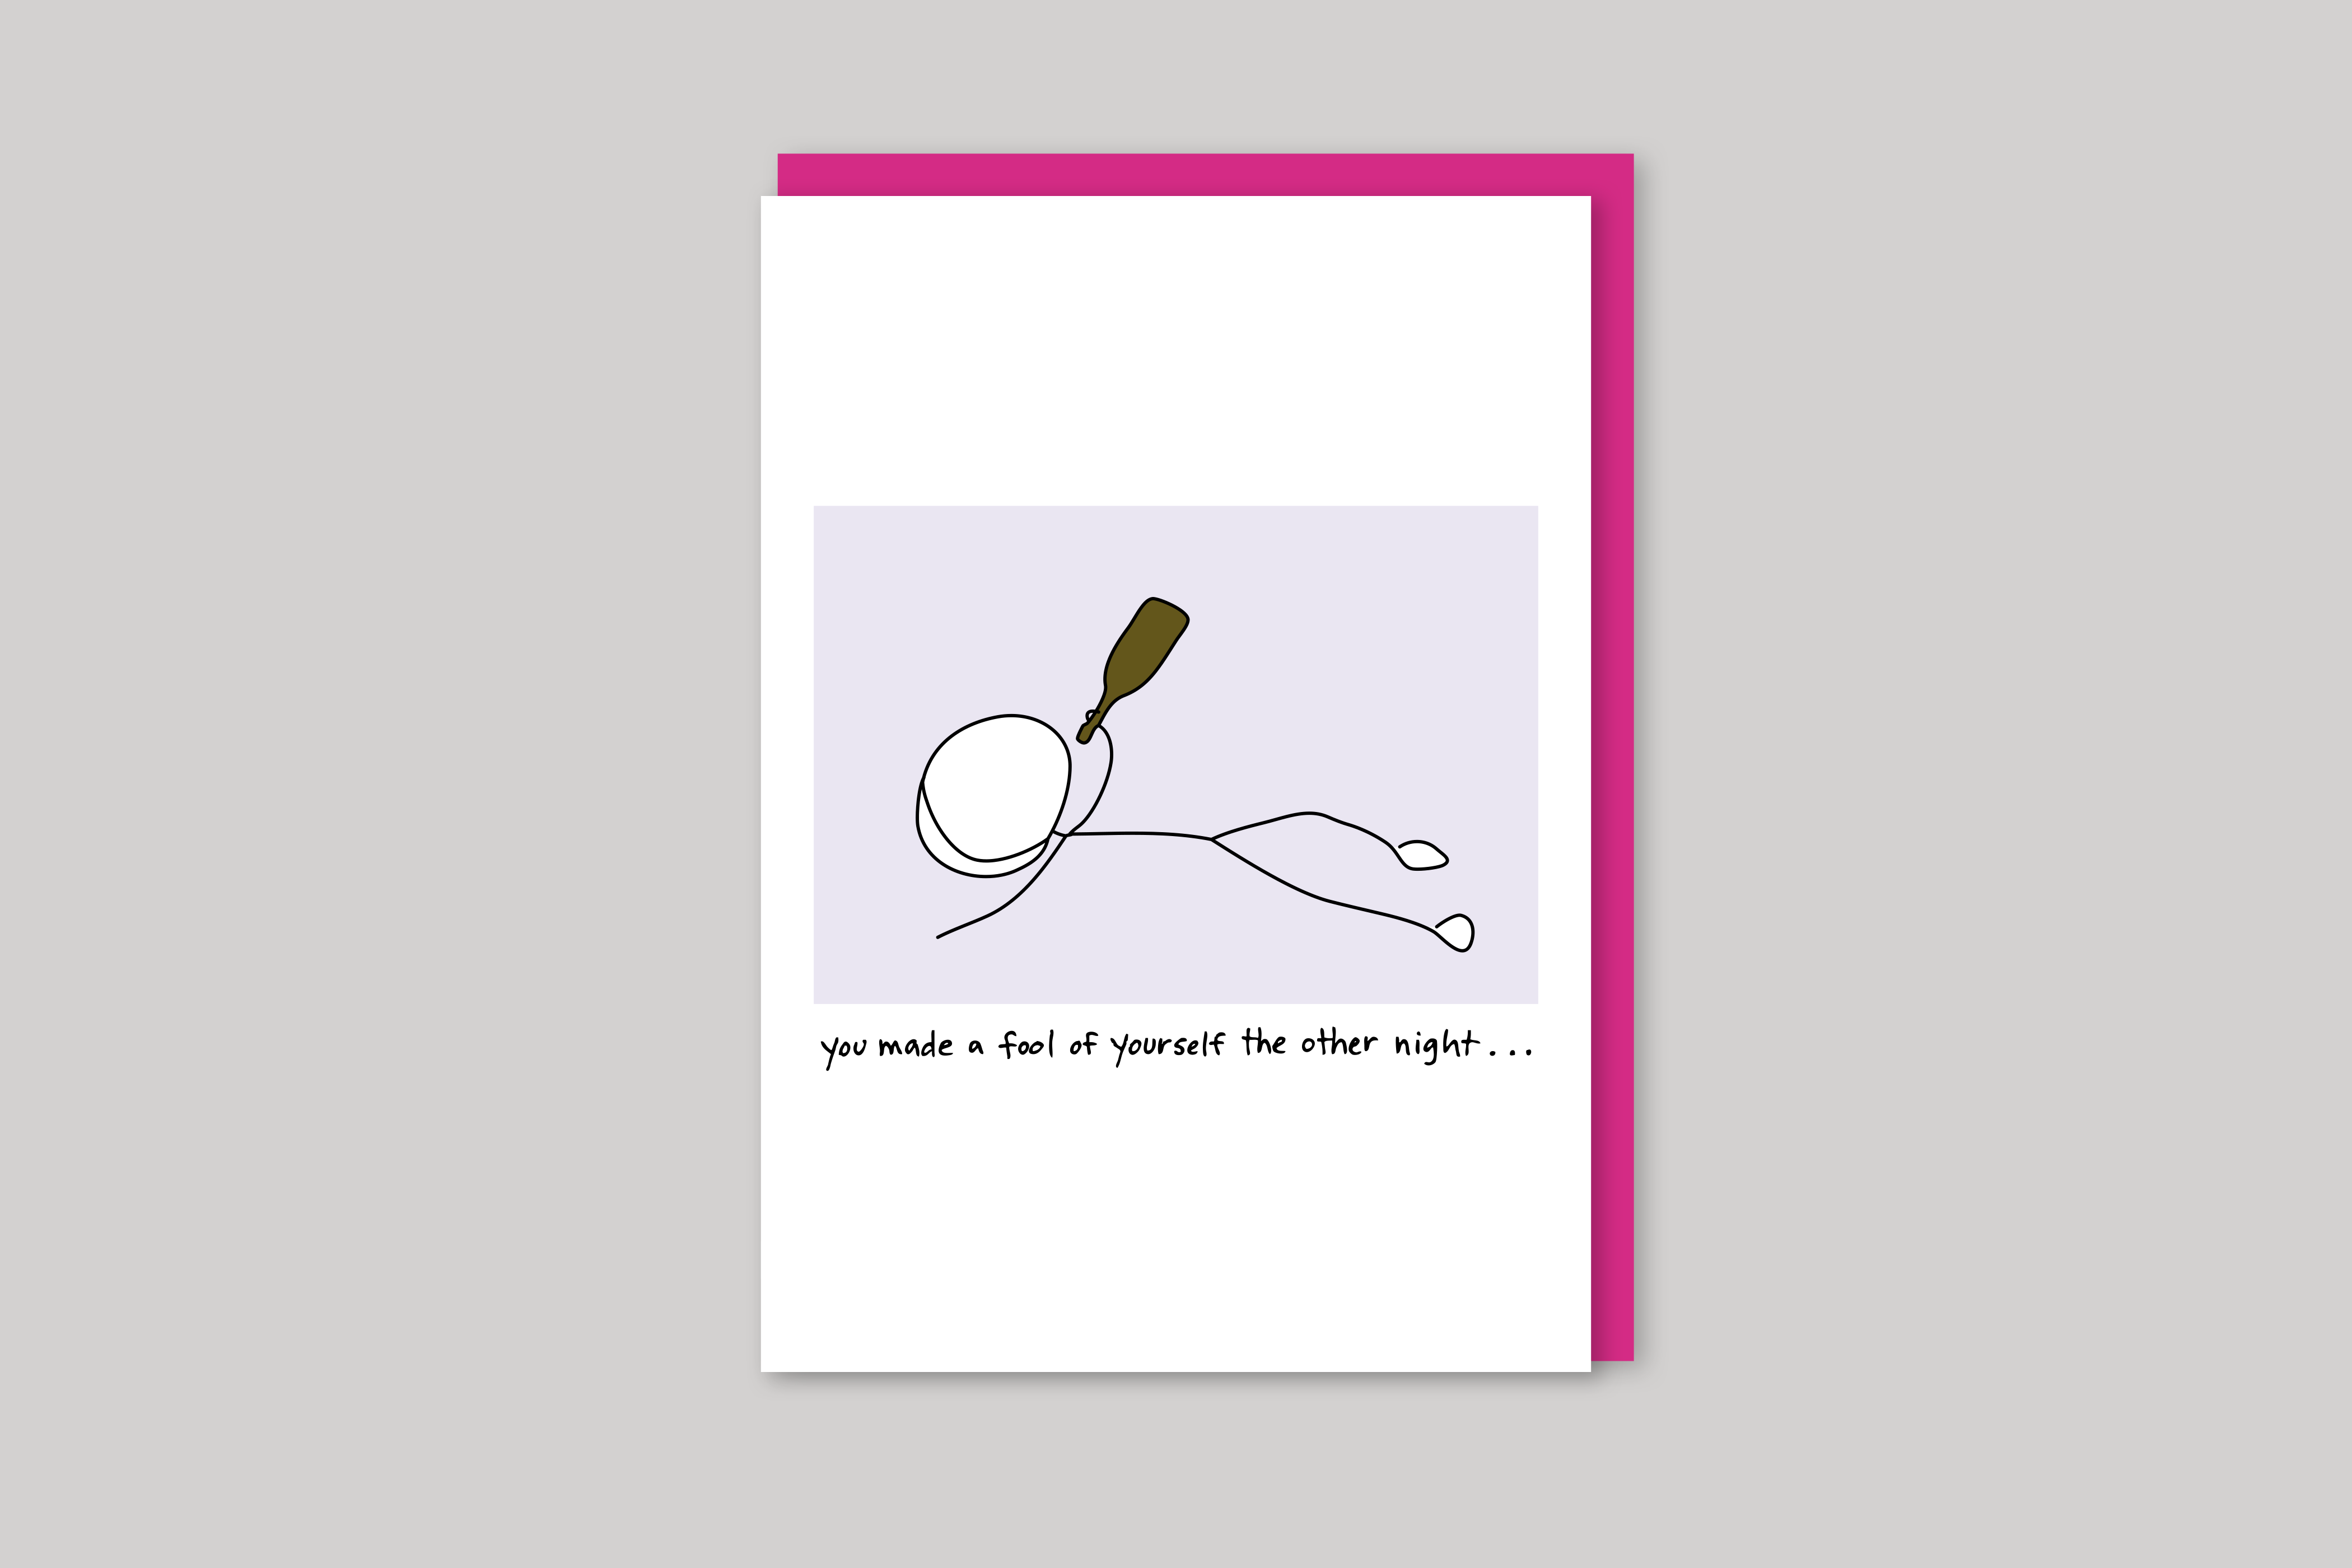 You Made A Fool of Yourself humorous illustration from Mean Cards range of greeting cards by Icon, back page.